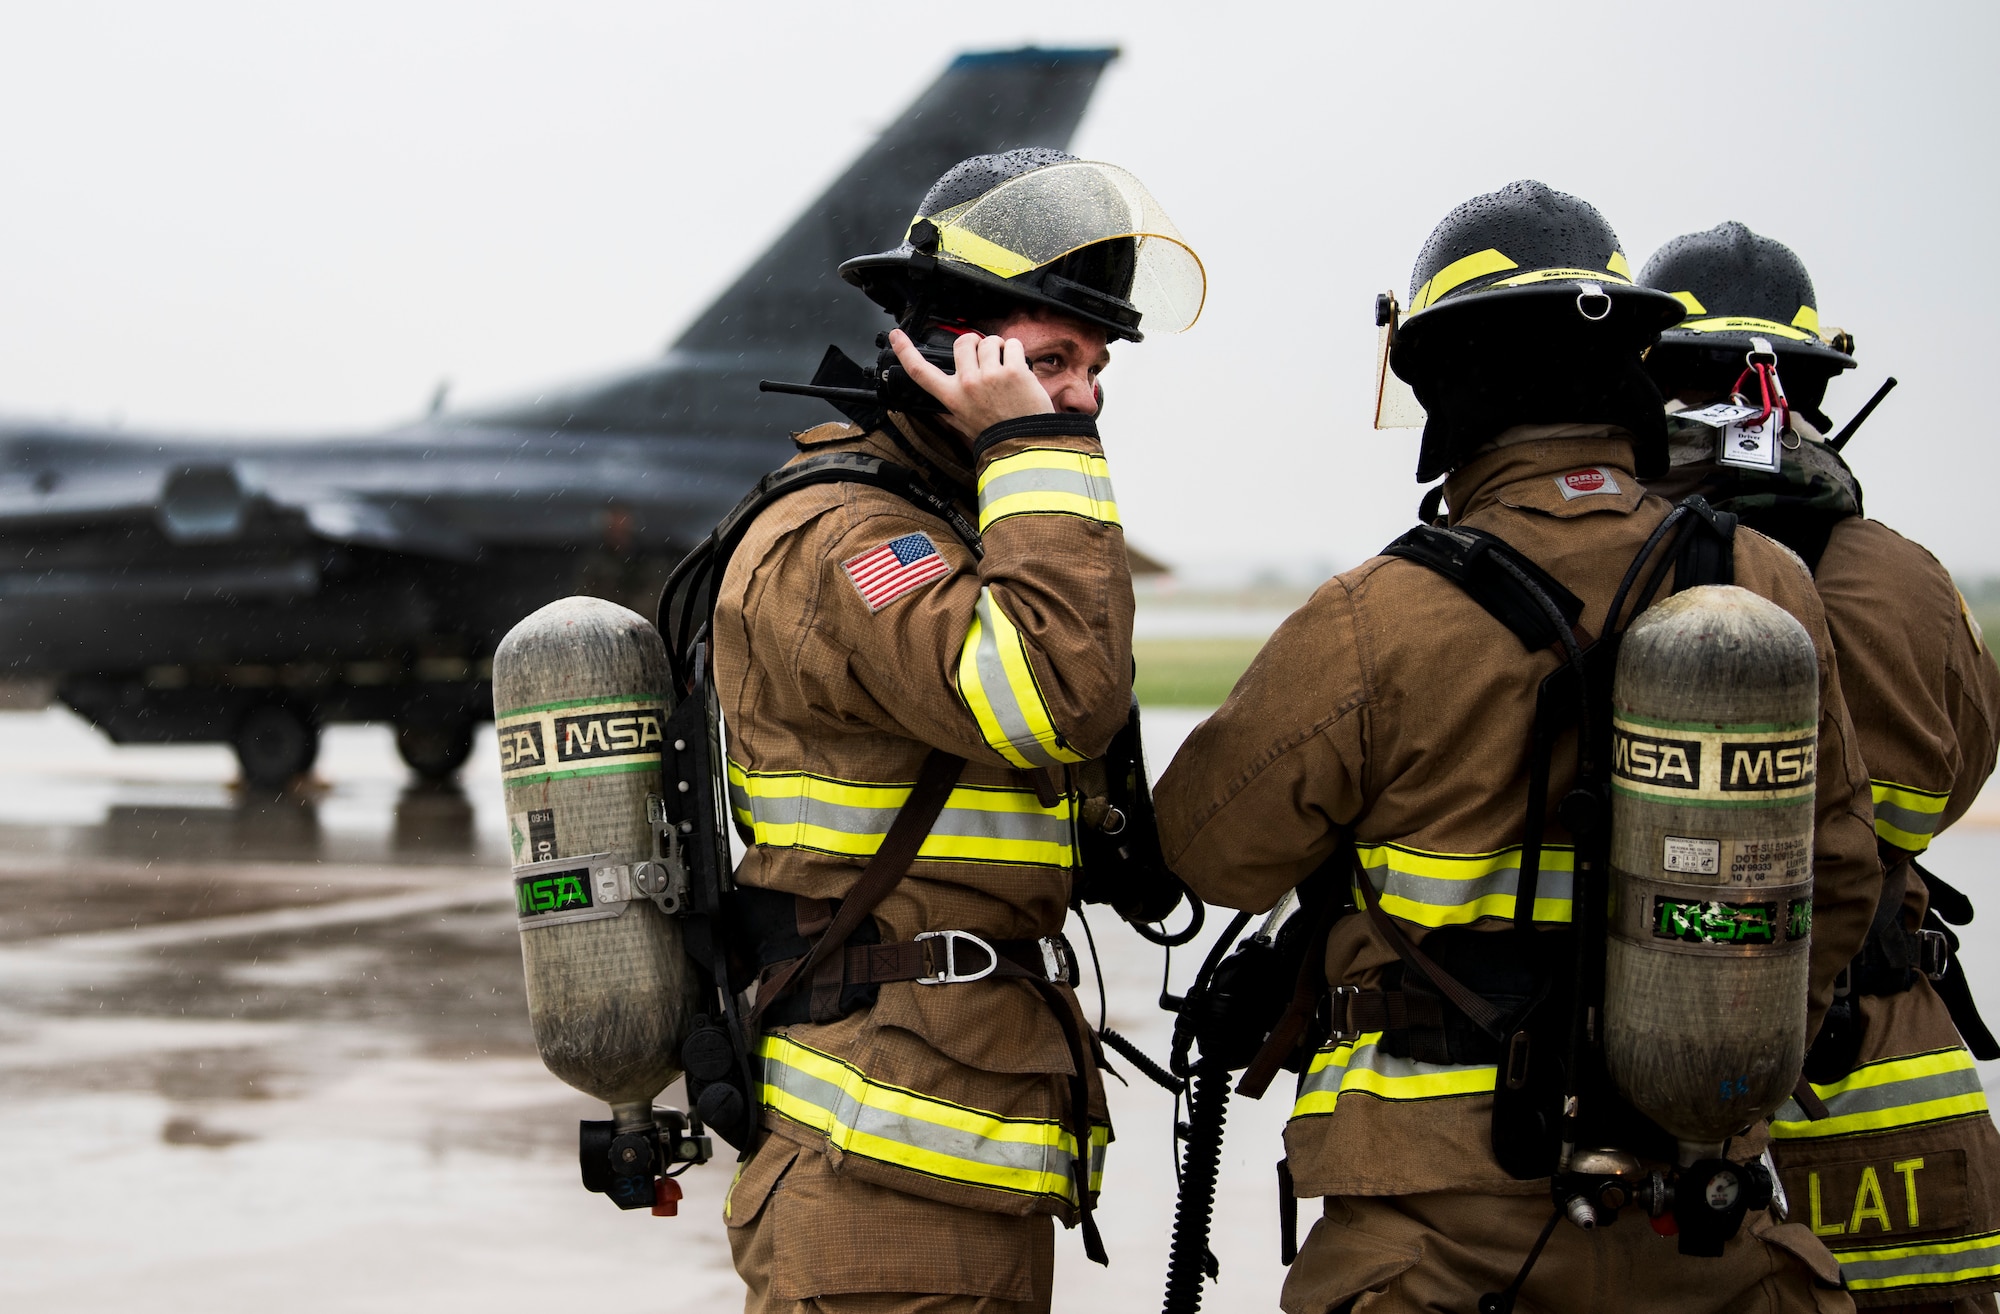 U.S. Air Force Airmen from the 8th Civil Engineer Squadron fire department talk on their radios during training at Kunsan Air Base, Republic of Korea, Aug. 27, 2019. The training gave first responders and maintenance professionals the opportunity to respond to a U.S. Air Force F-16 Fighting Falcon emergency landing. (U.S. Air Force photo by Senior Airman Stefan Alvarez)